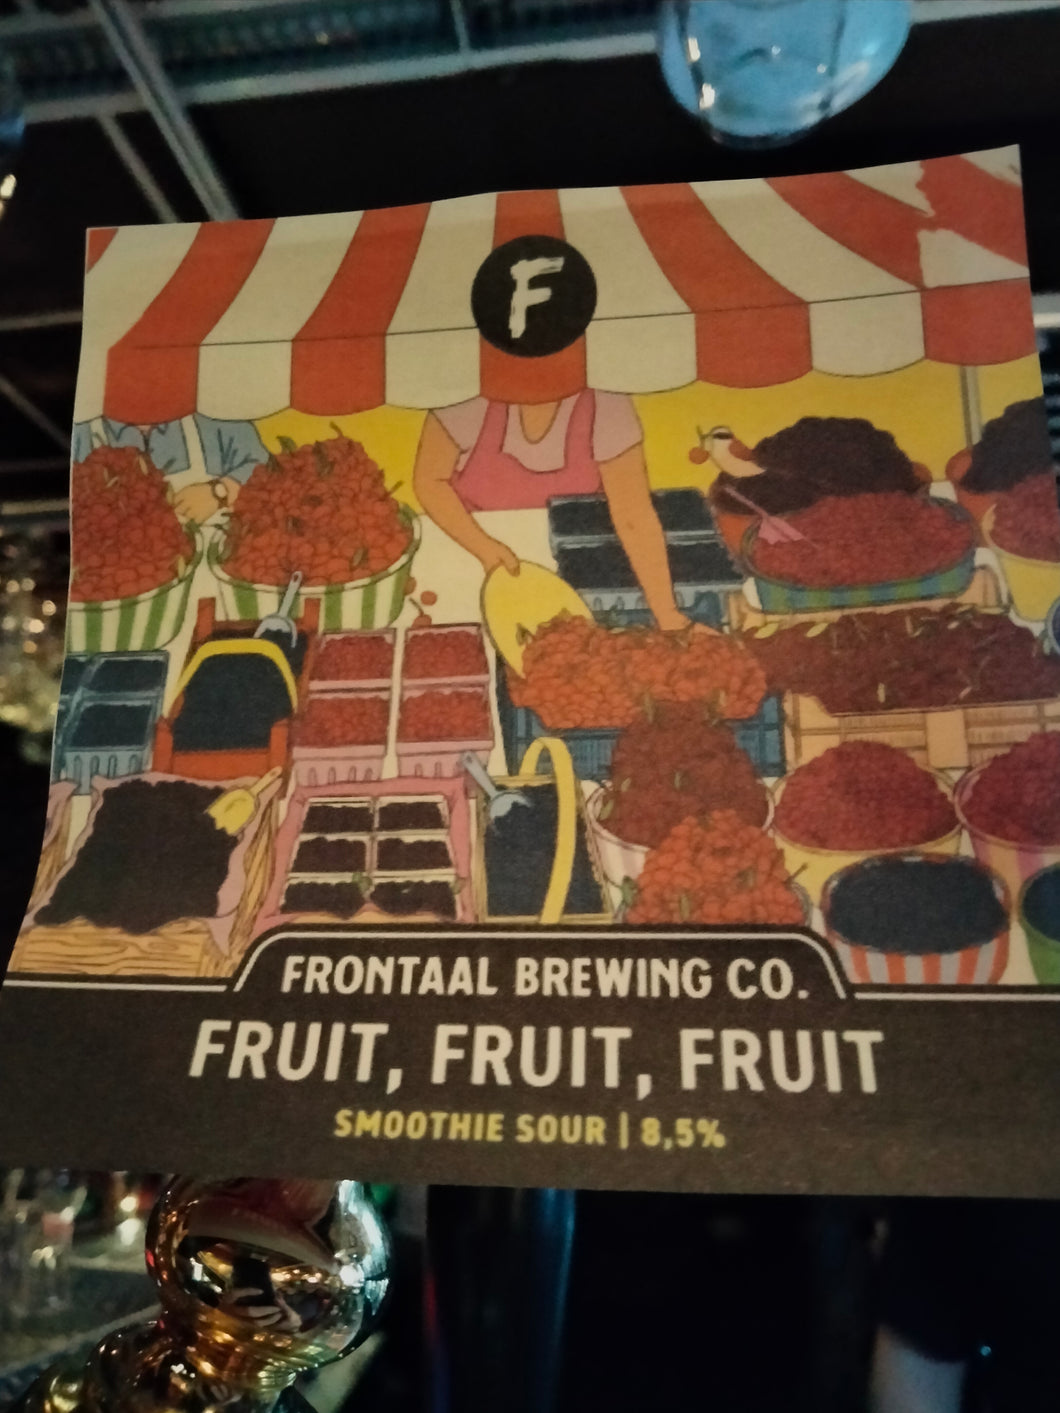 Frontaal Brewing Co. X Vault City Brewing